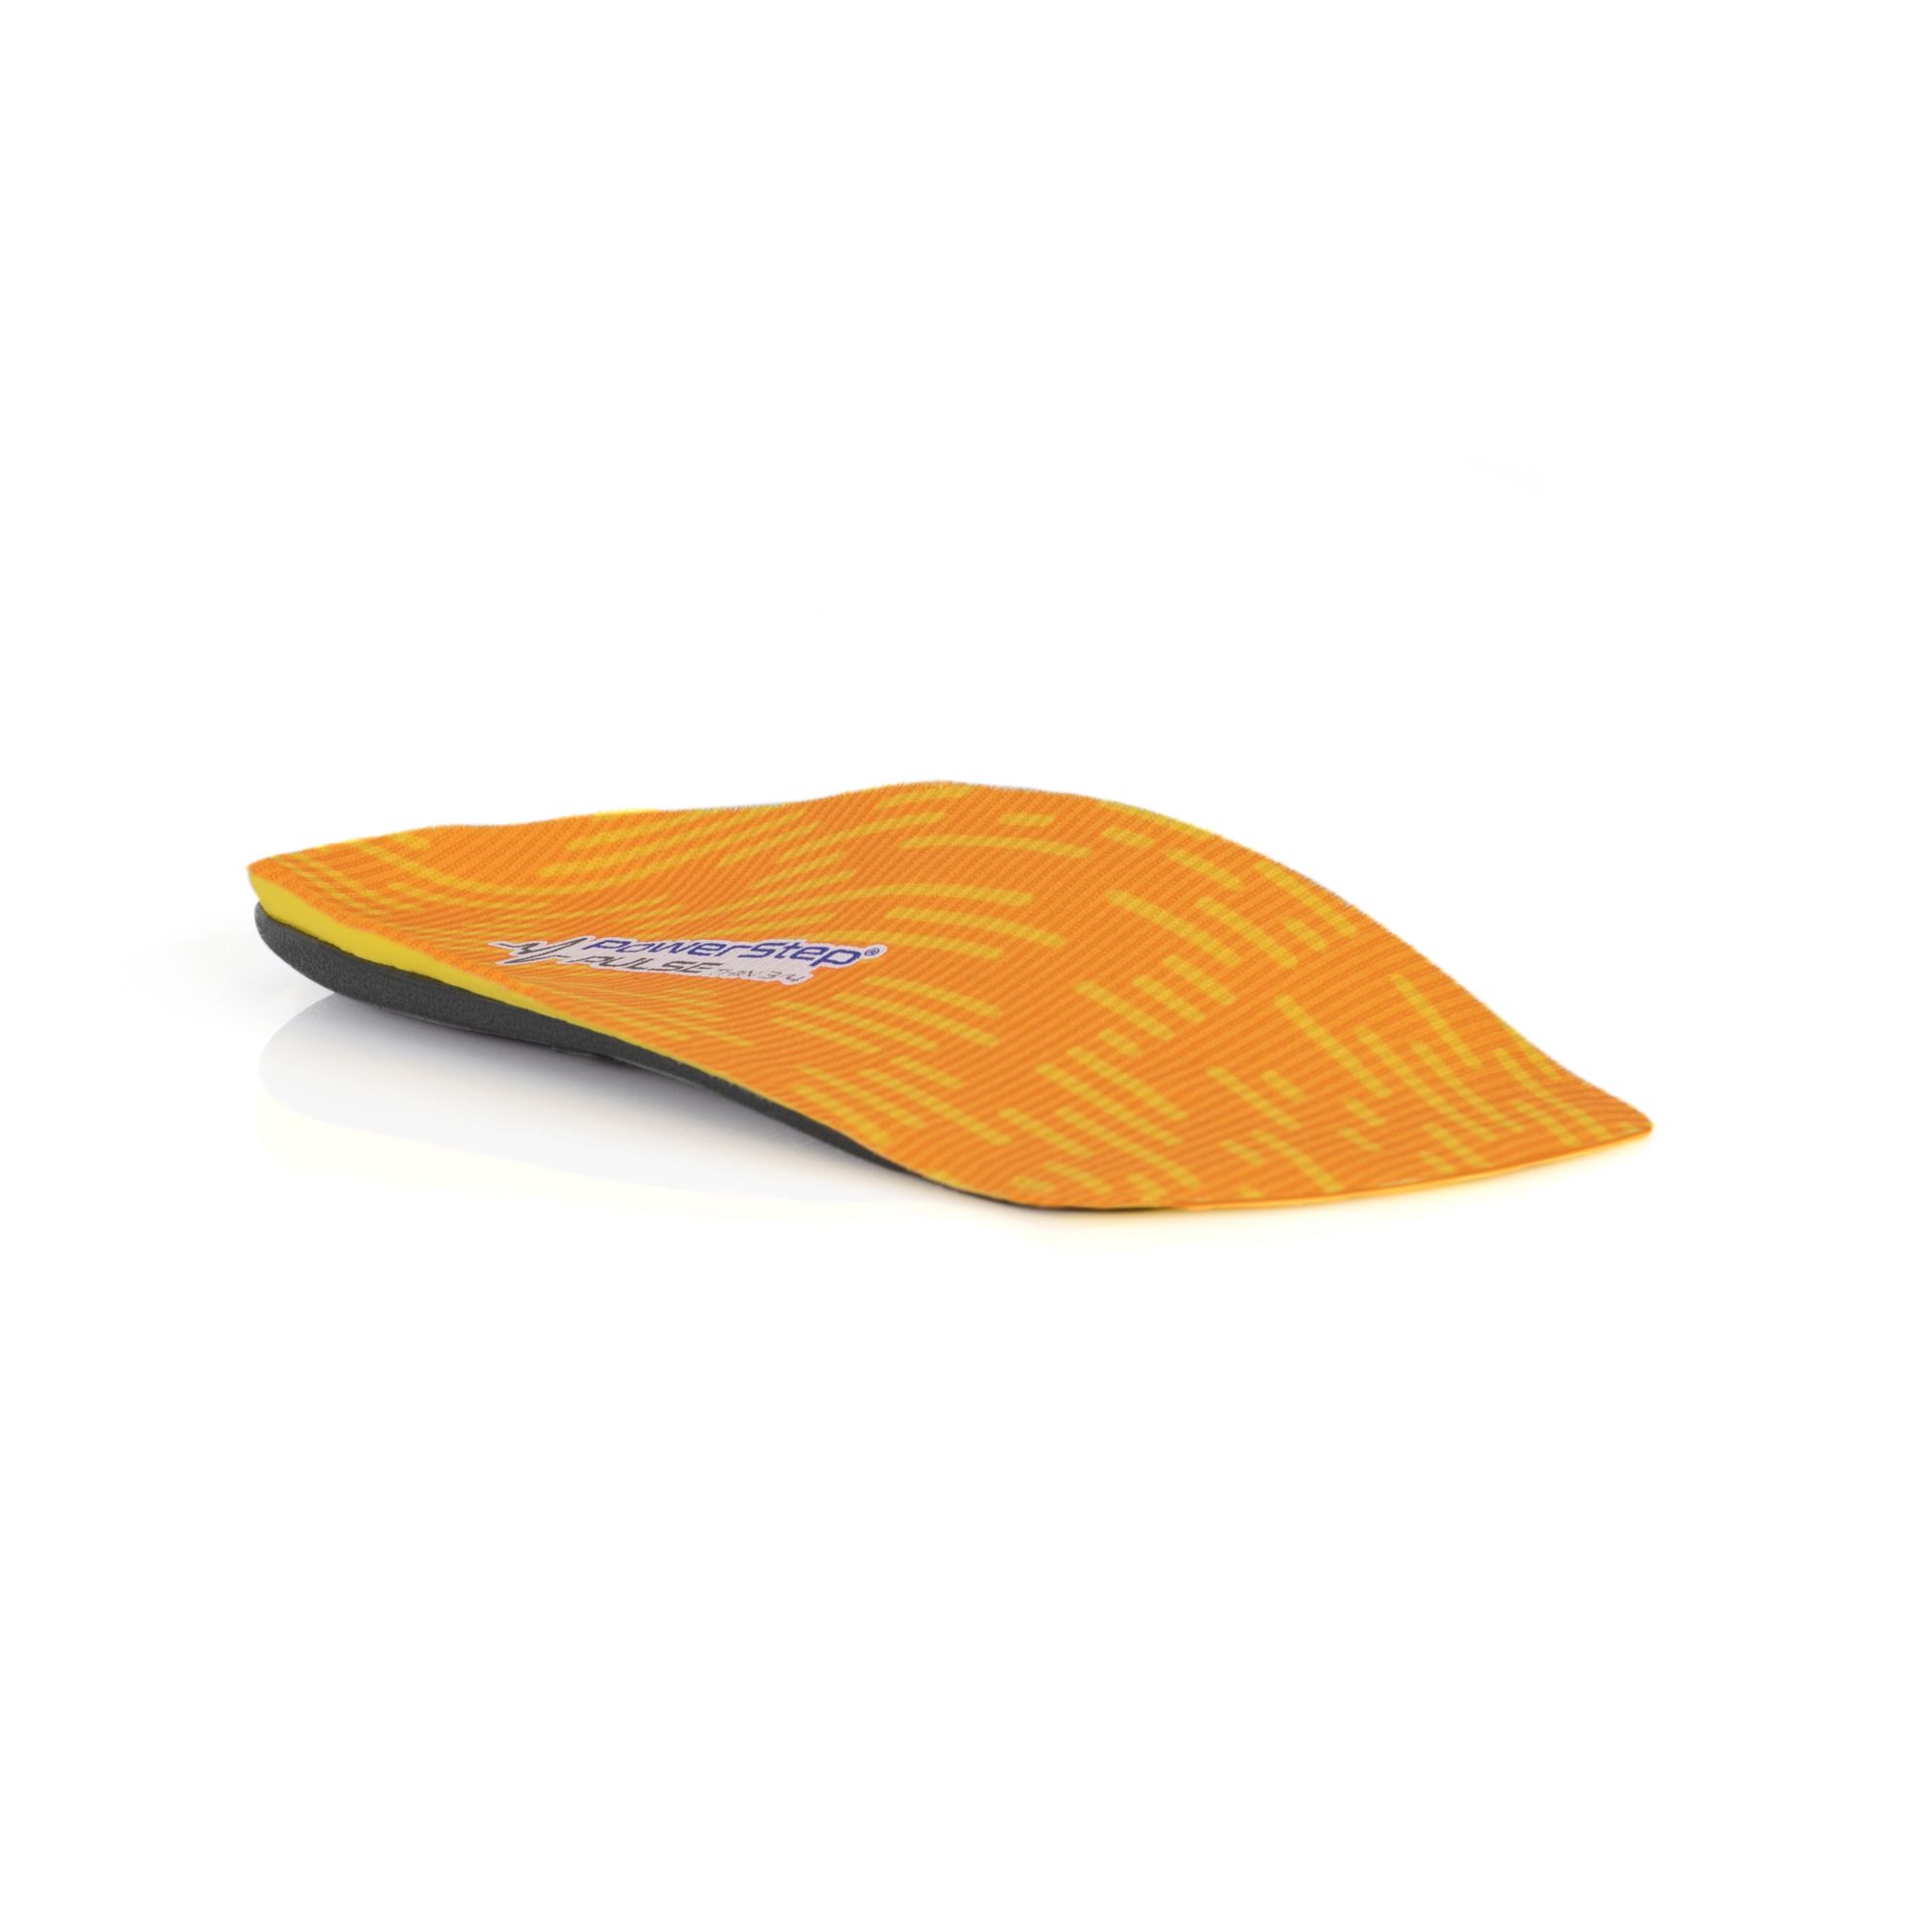 PowerStep PULSE Thin ¾ Insoles